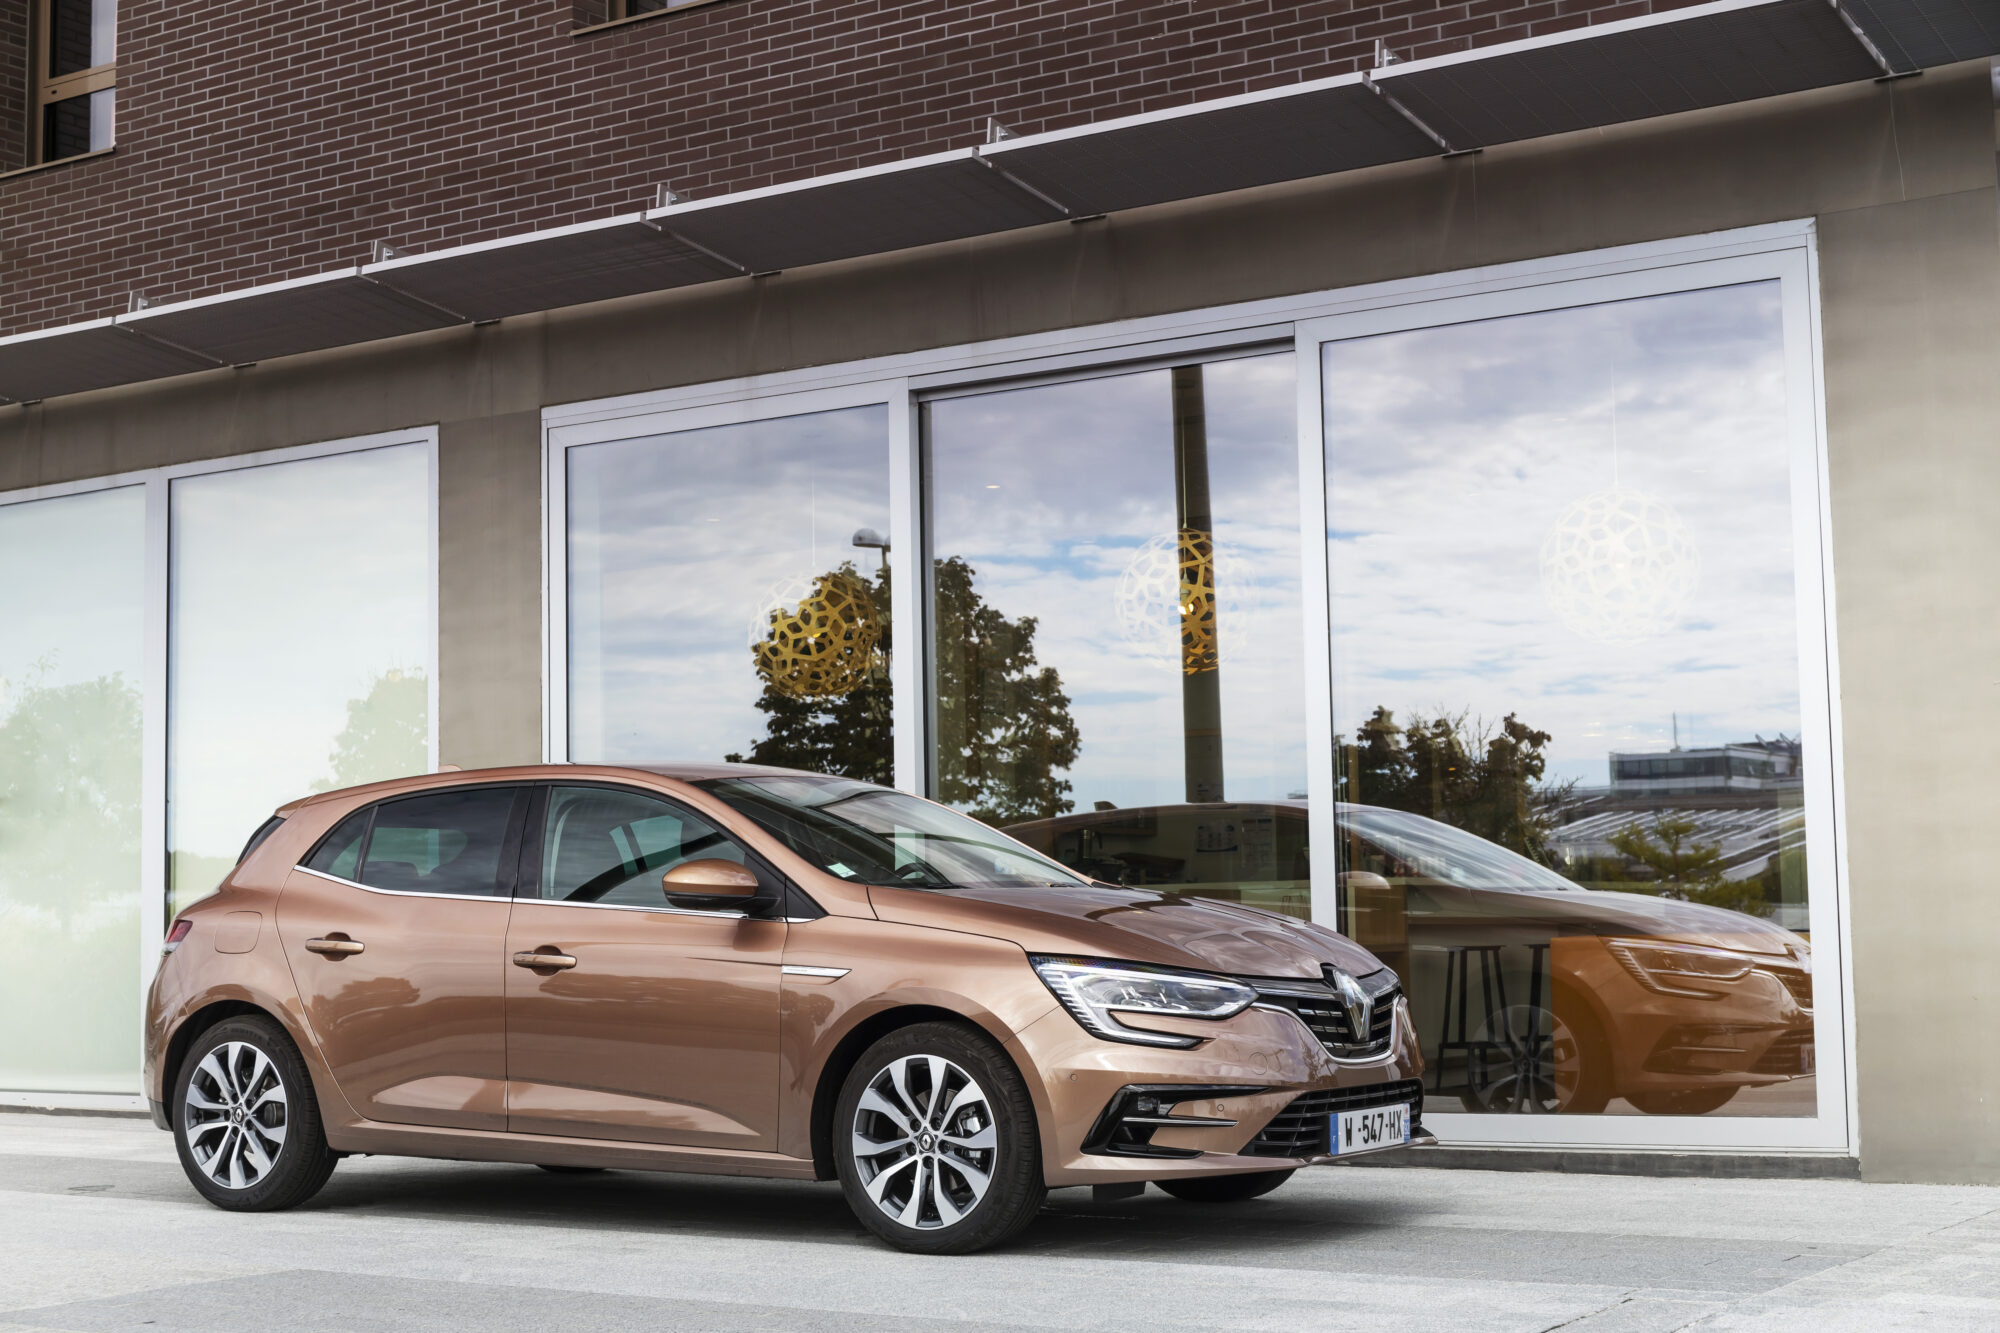 2020 - All New Renault MEGANE Hatchback - EDITION ONE LIMITED EDITION - Test drives